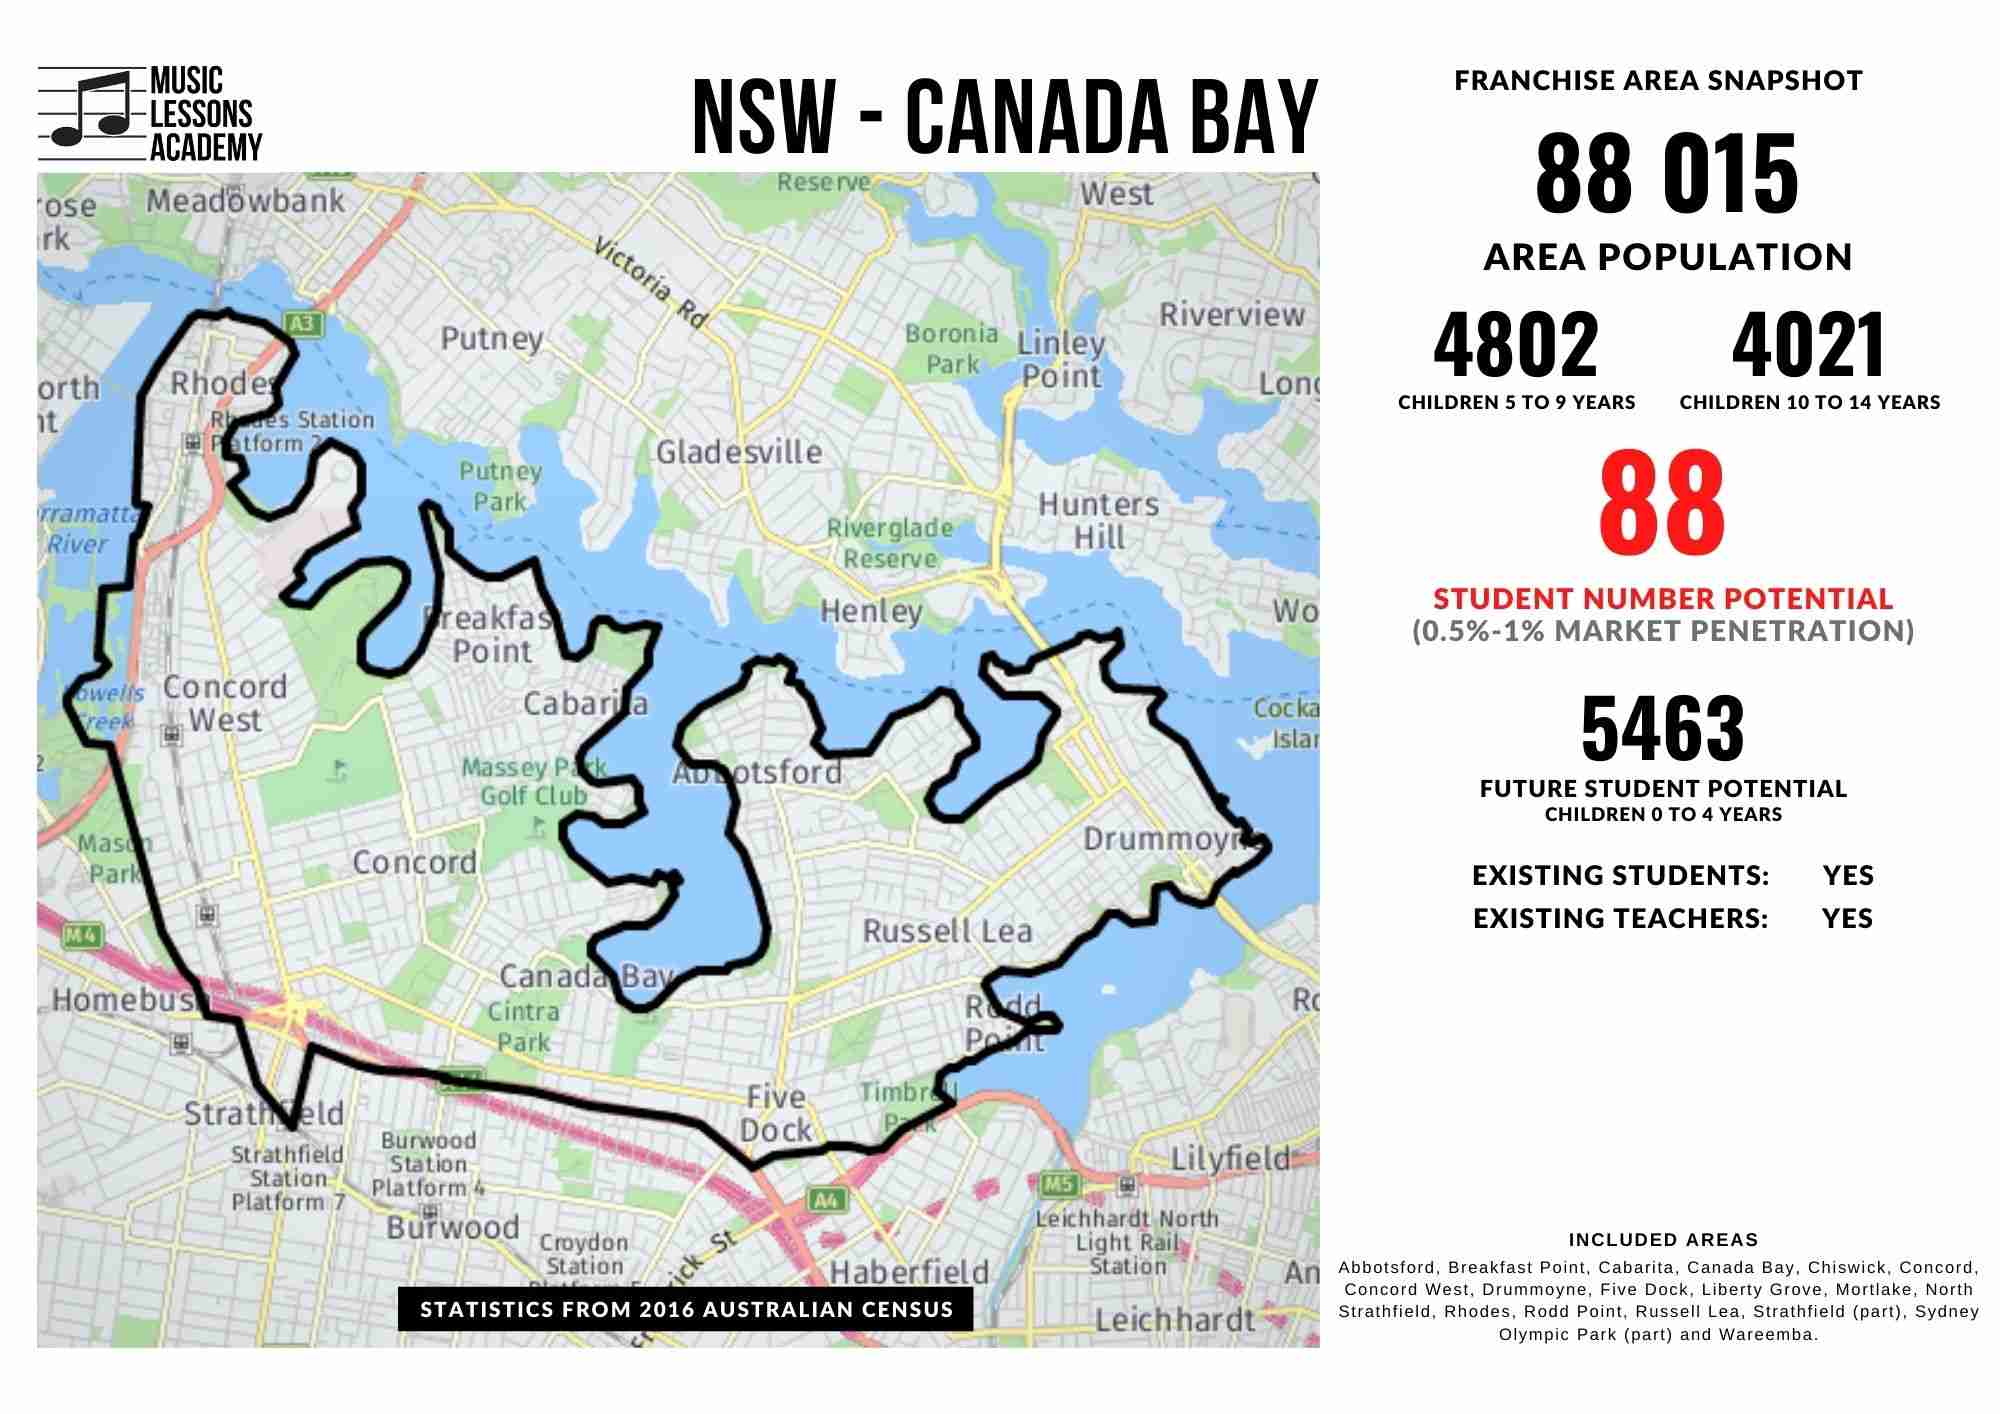 NSW Canada Bay Franchise for sale